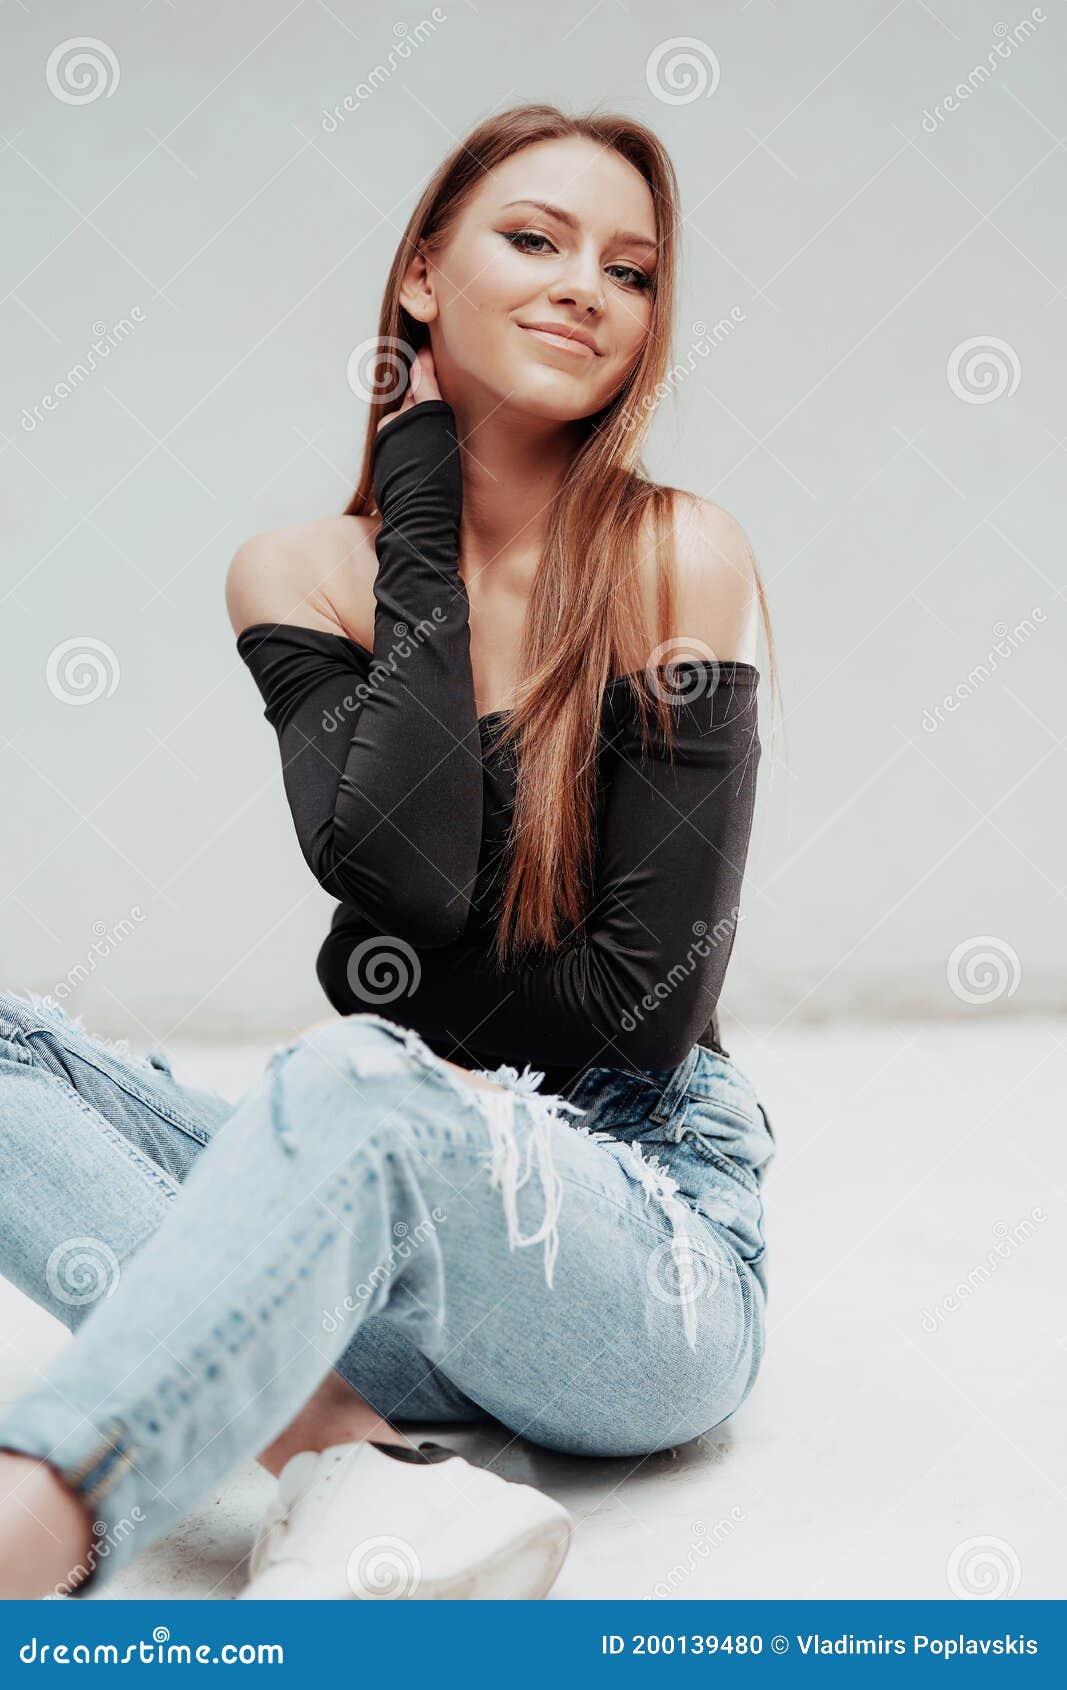 Girl in Fashion Stylish Jeans Stock Image - Image of asian, indian: 30049777